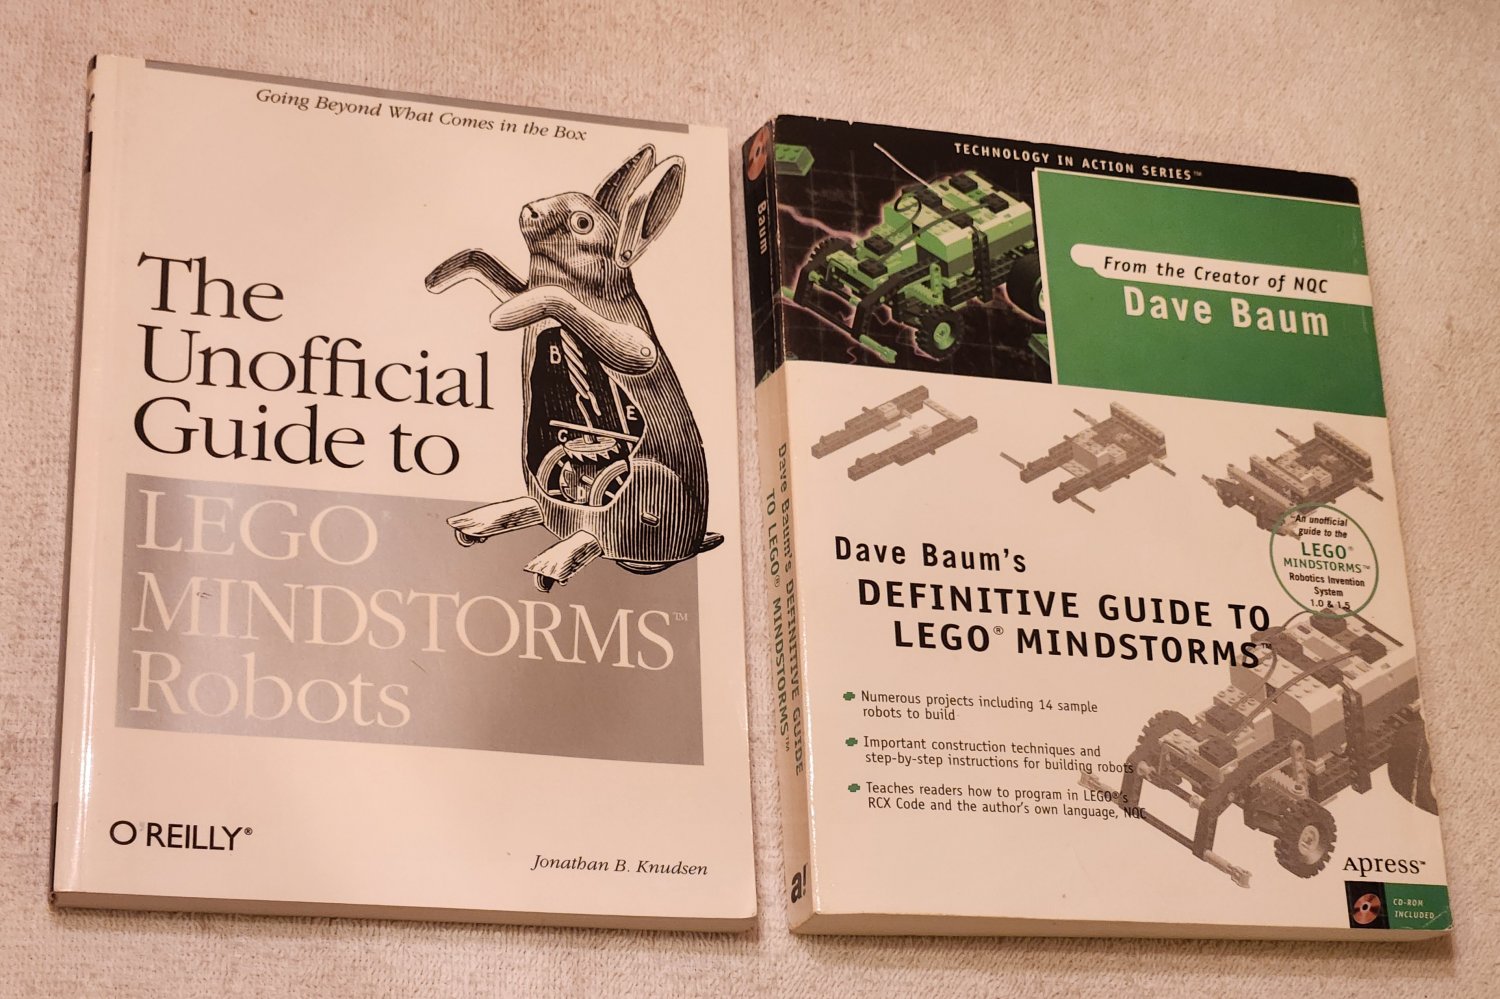 LEGO Mindstorms Softcover Paperback Book Lot Unofficial Guide Robots Definitive Guide To Dave Baum